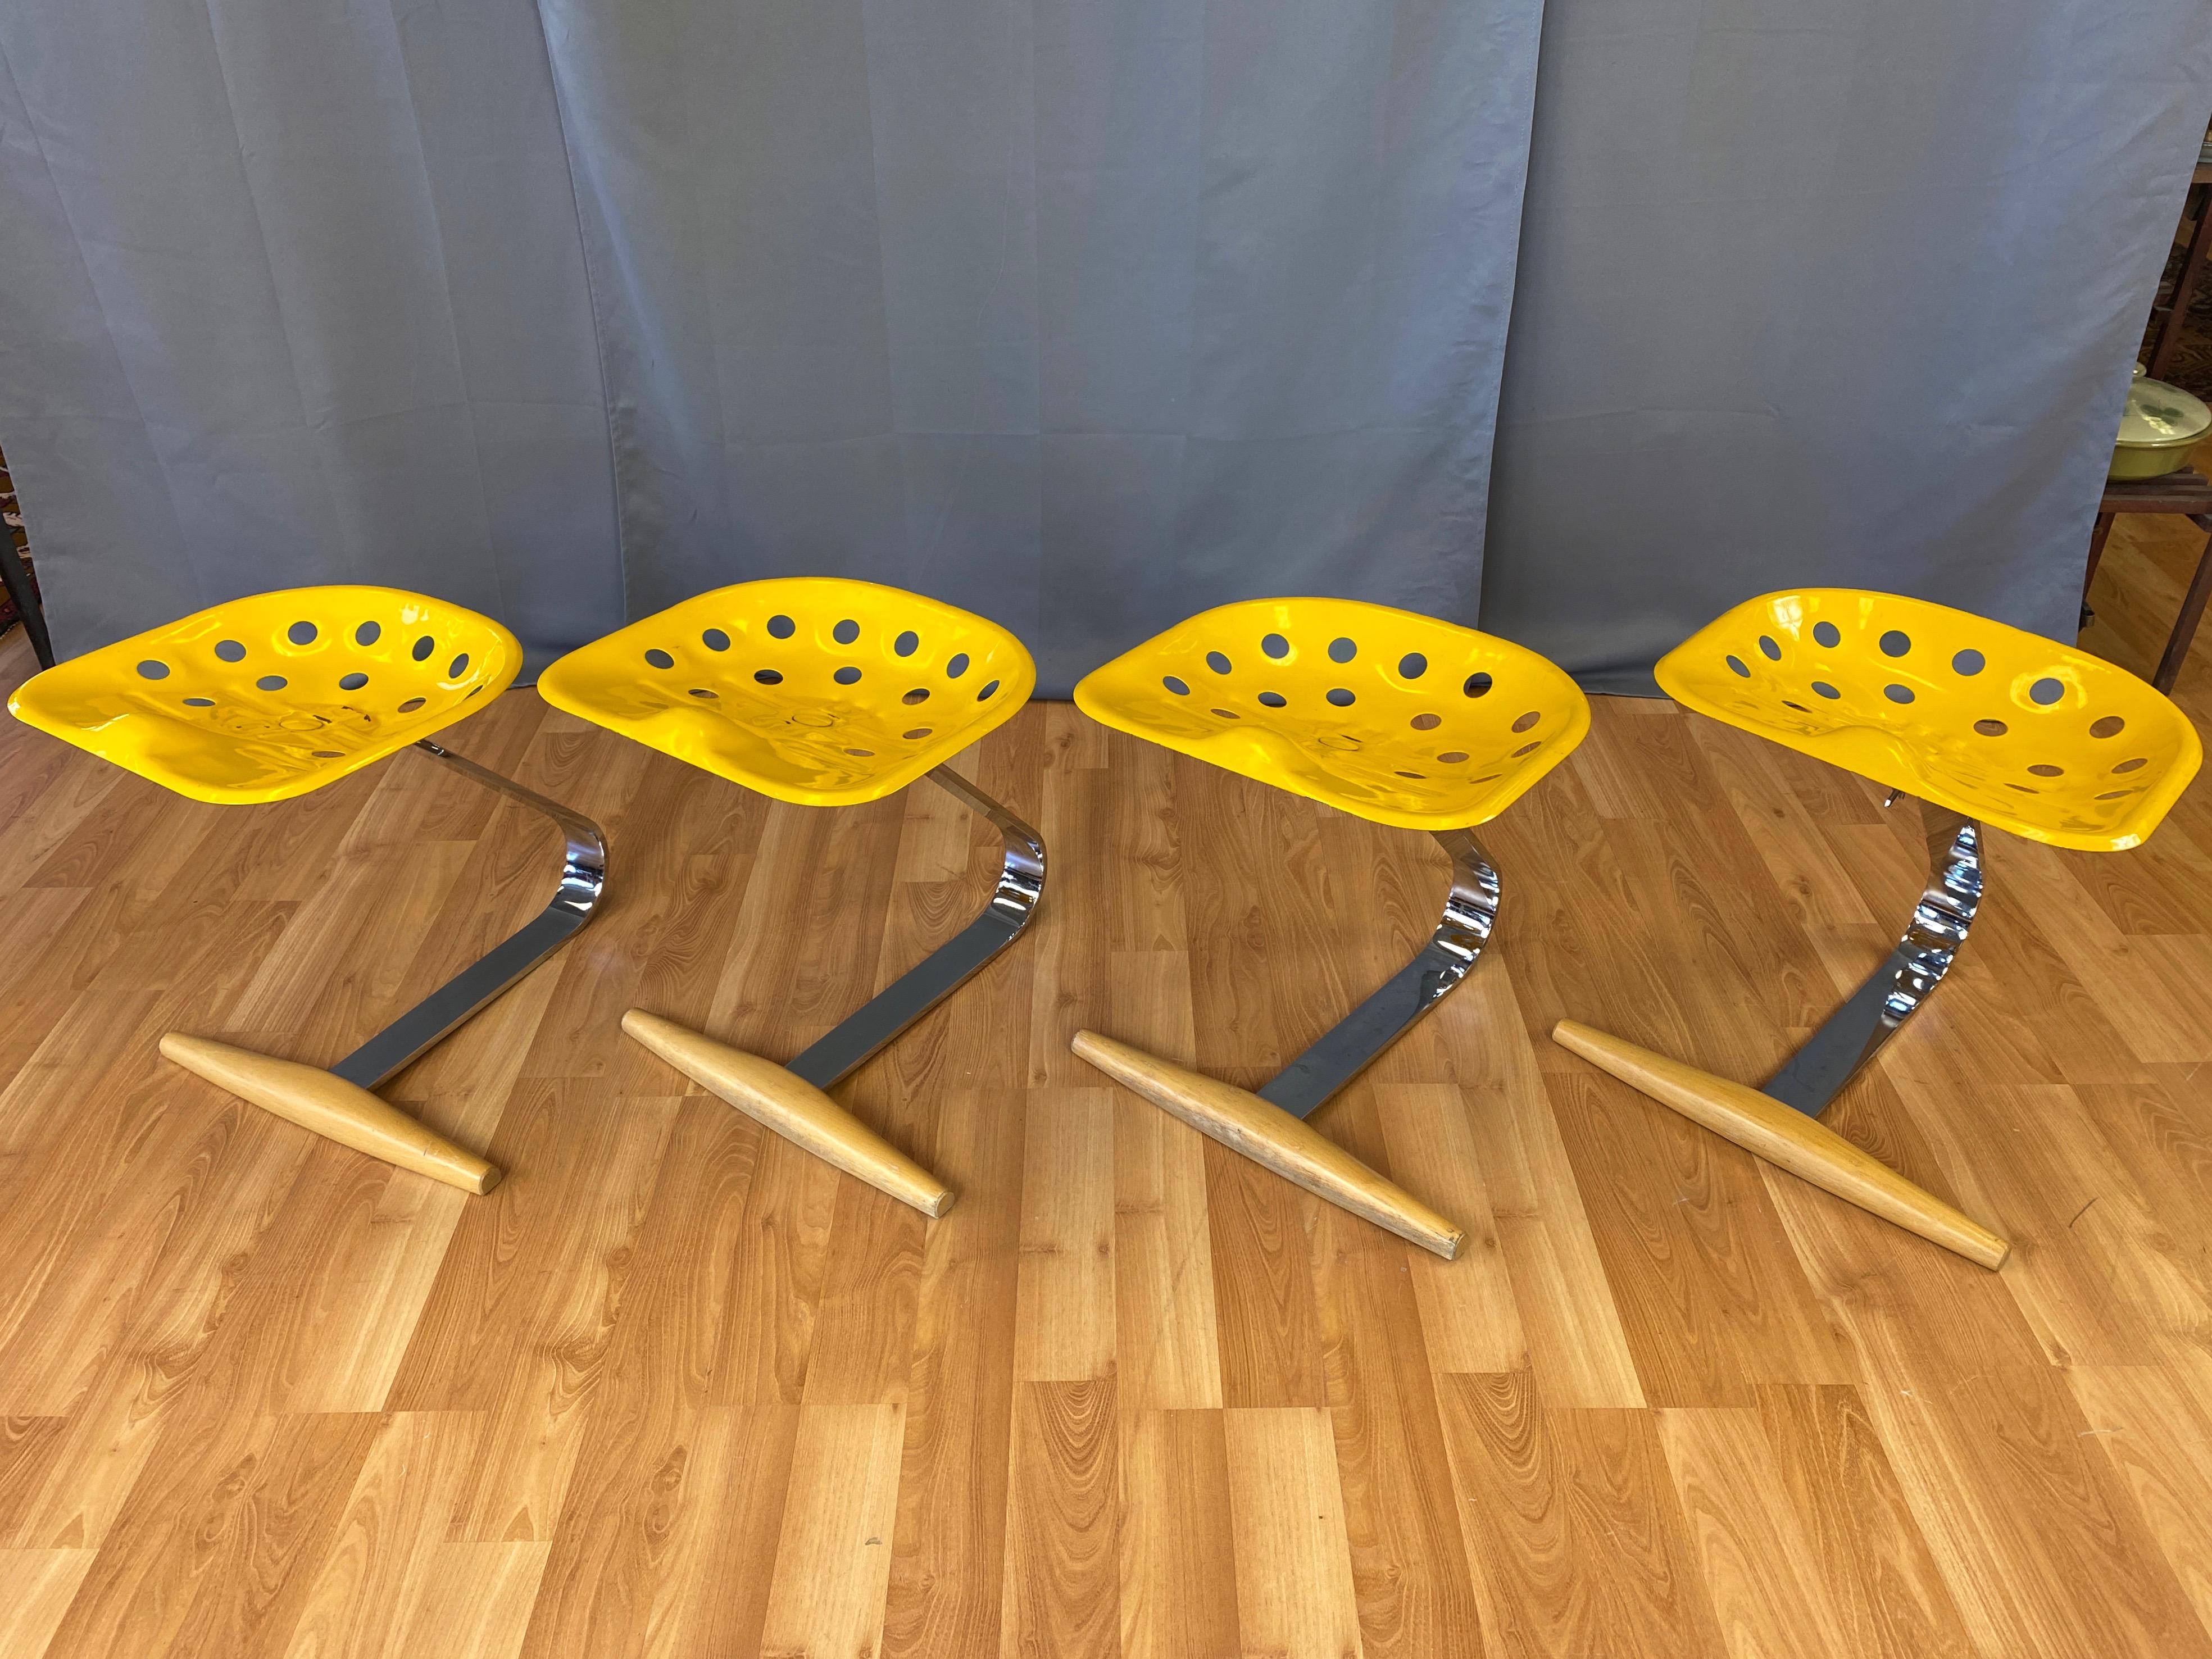 Two 1990s yellow Mezzadro stools designed in 1957 by Achille & Pier Giacomo Castiglioni for Zanotta. Offered individually, and identified from left to right in photos as ‘A’, ‘B’, ‘C’, and ‘D’, with ‘A’ and 